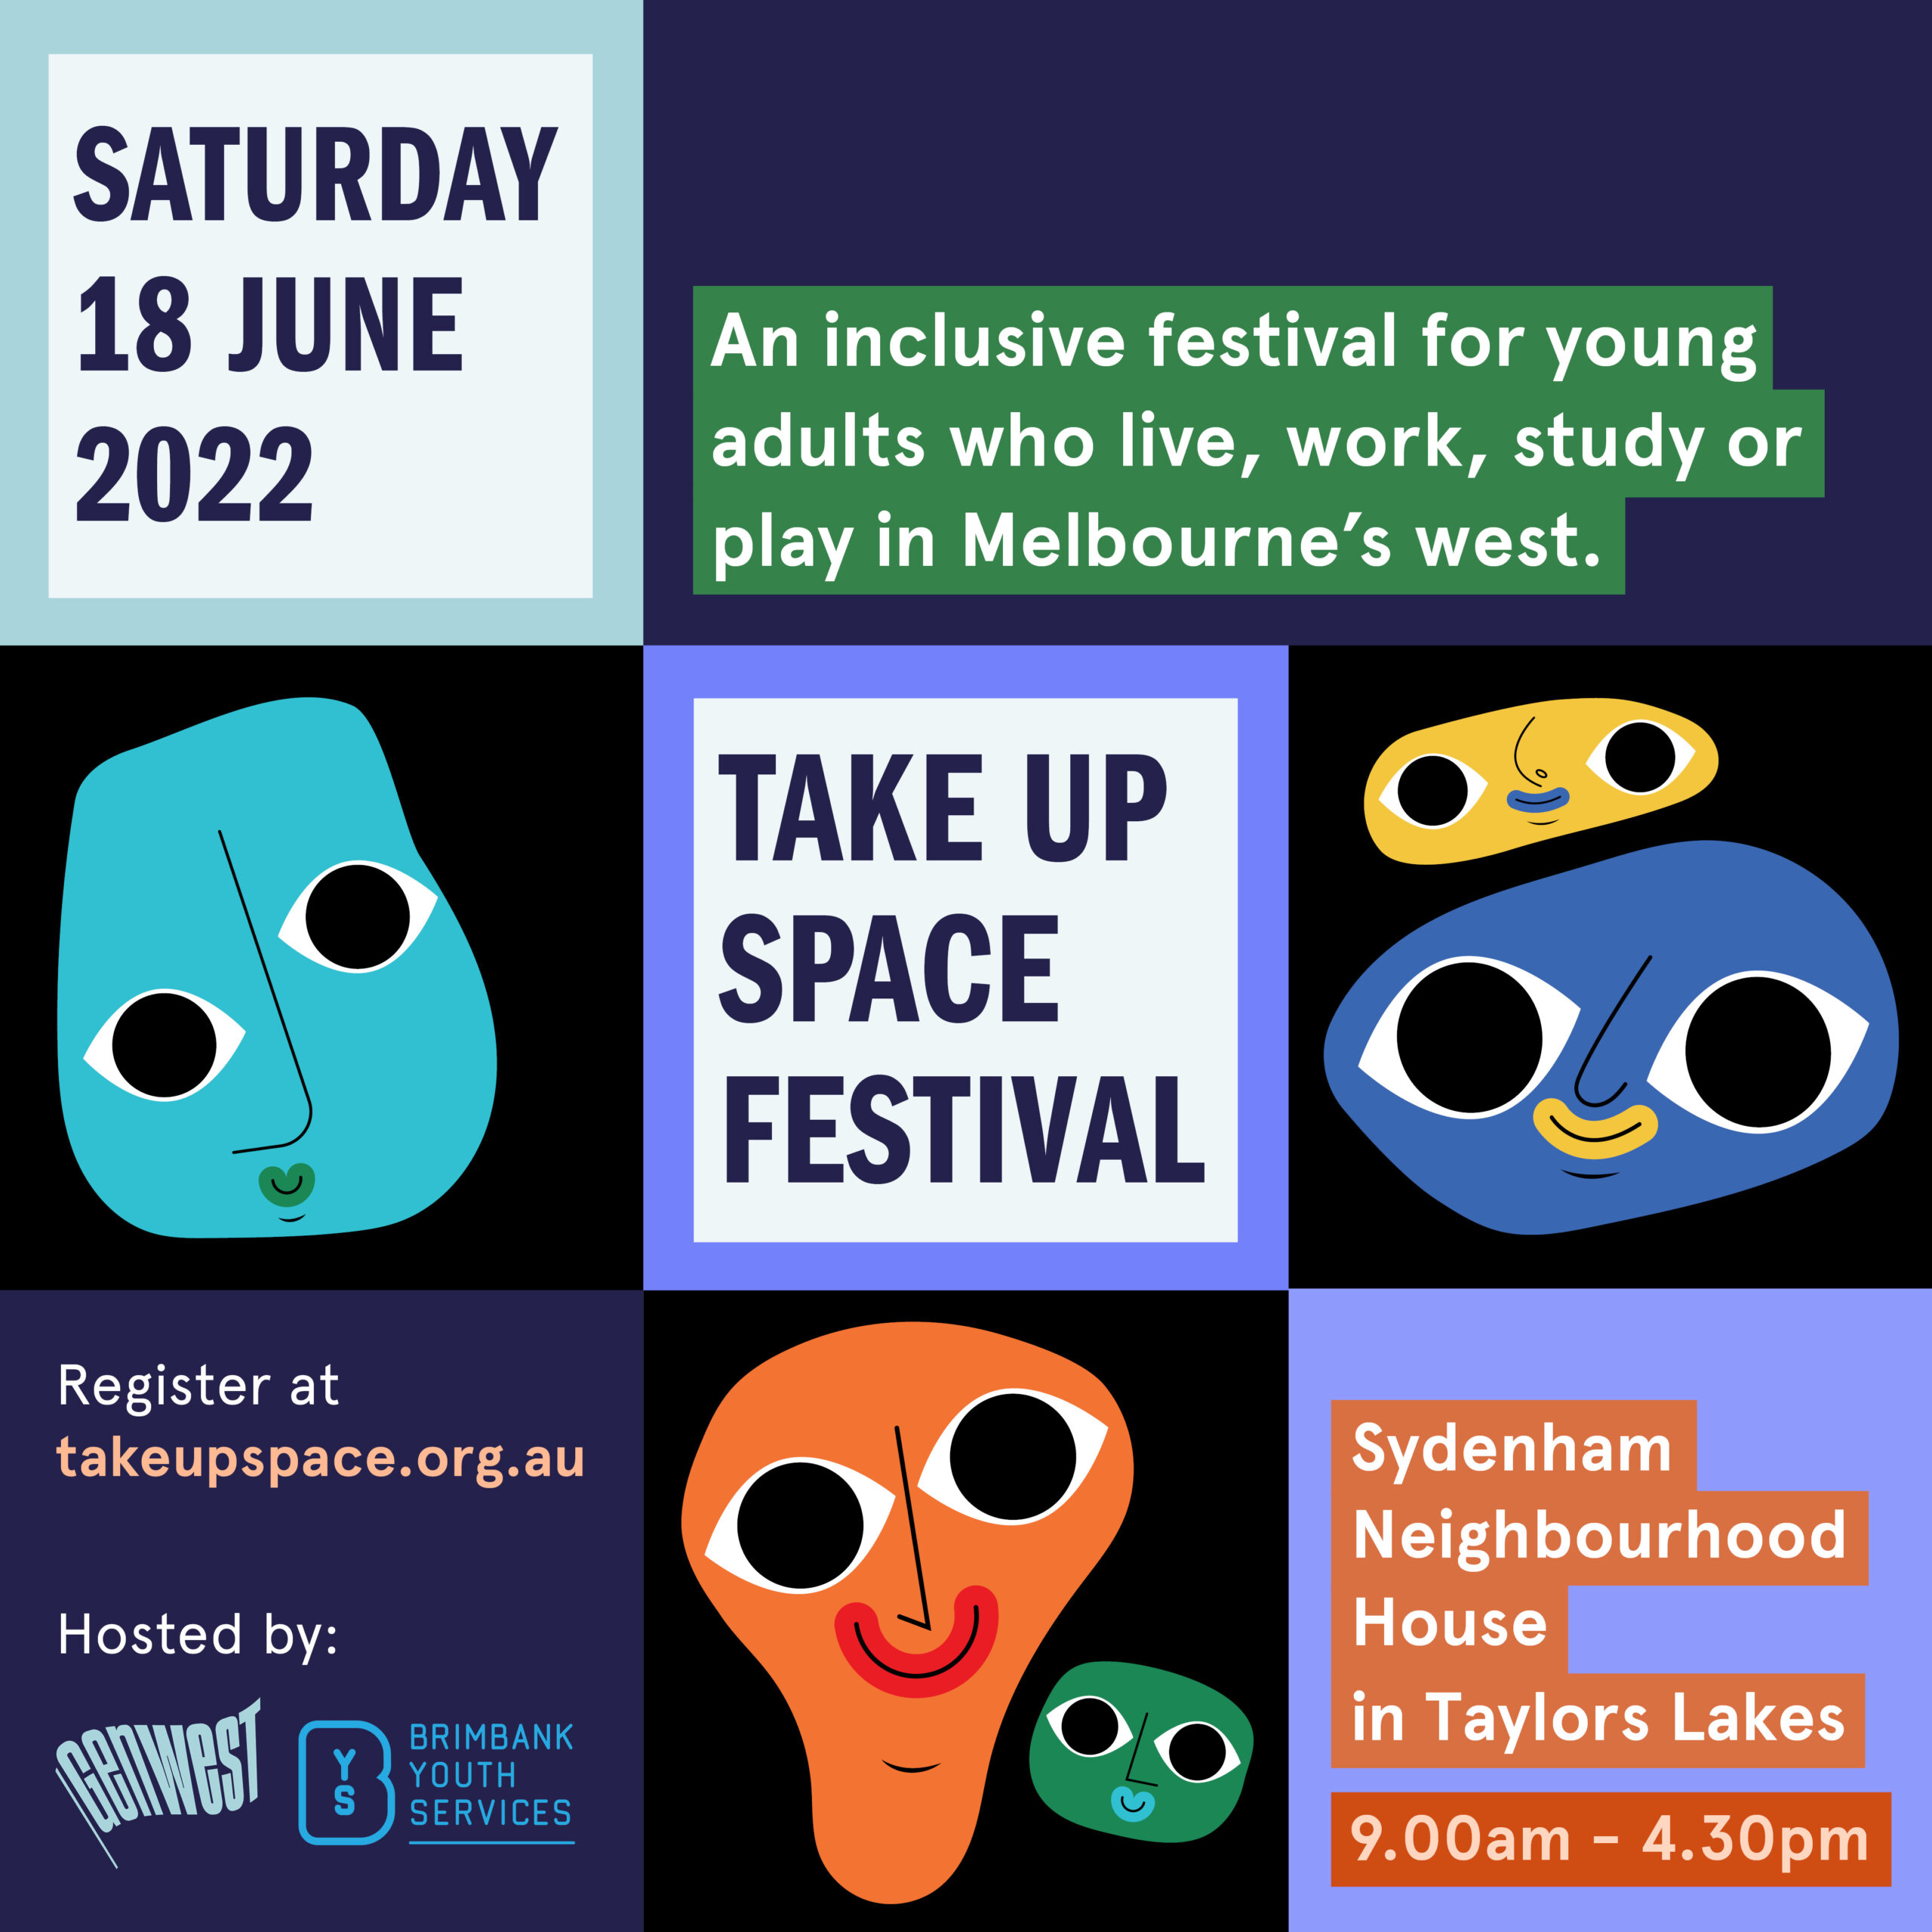 Seven squares and one rectangle in shades of black, blue and purple with text and illustrations. Illustrations are of individual bright colour cartoon style faces with big eyes and smiling mouths. The faces are blue, orange, green and yellow. The text sits in four of the boxes and reads: “Saturday 18 June 2022. Take Up Space Festival. An inclusive festival for young adults who live, work, study or play in Melbourne’s west. Register at takeupspace.org.au. Sydenham Neighbourhood House in Taylors Lakes. 9.00am - 4.30pm. In the bottom right corner is the GenWest logo, Brimbank City Council logo with ‘proudly supported by’ beside it, and Brimbank Youth Services logo